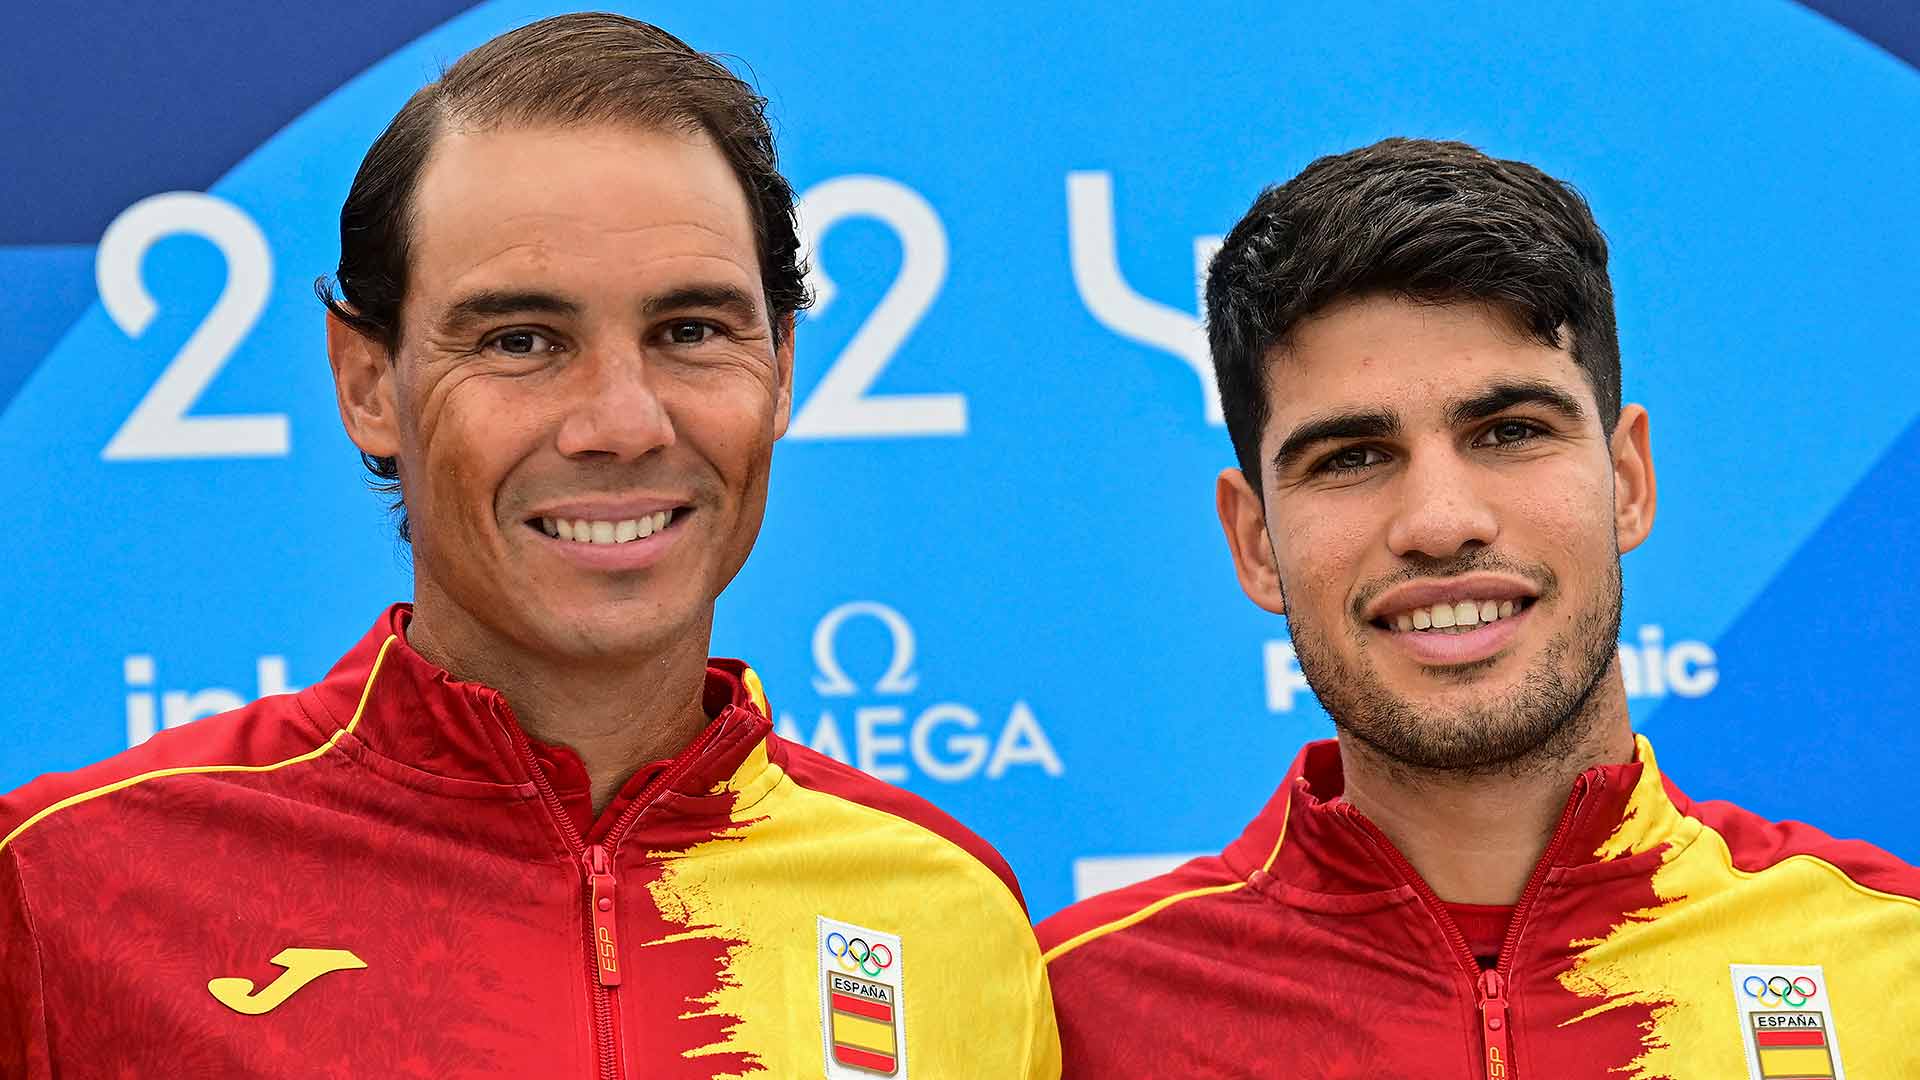 Rafael Nadal and Carlos Alcaraz will take to the doubles court Saturday on Day 1 of the Olympic Tennis Event.